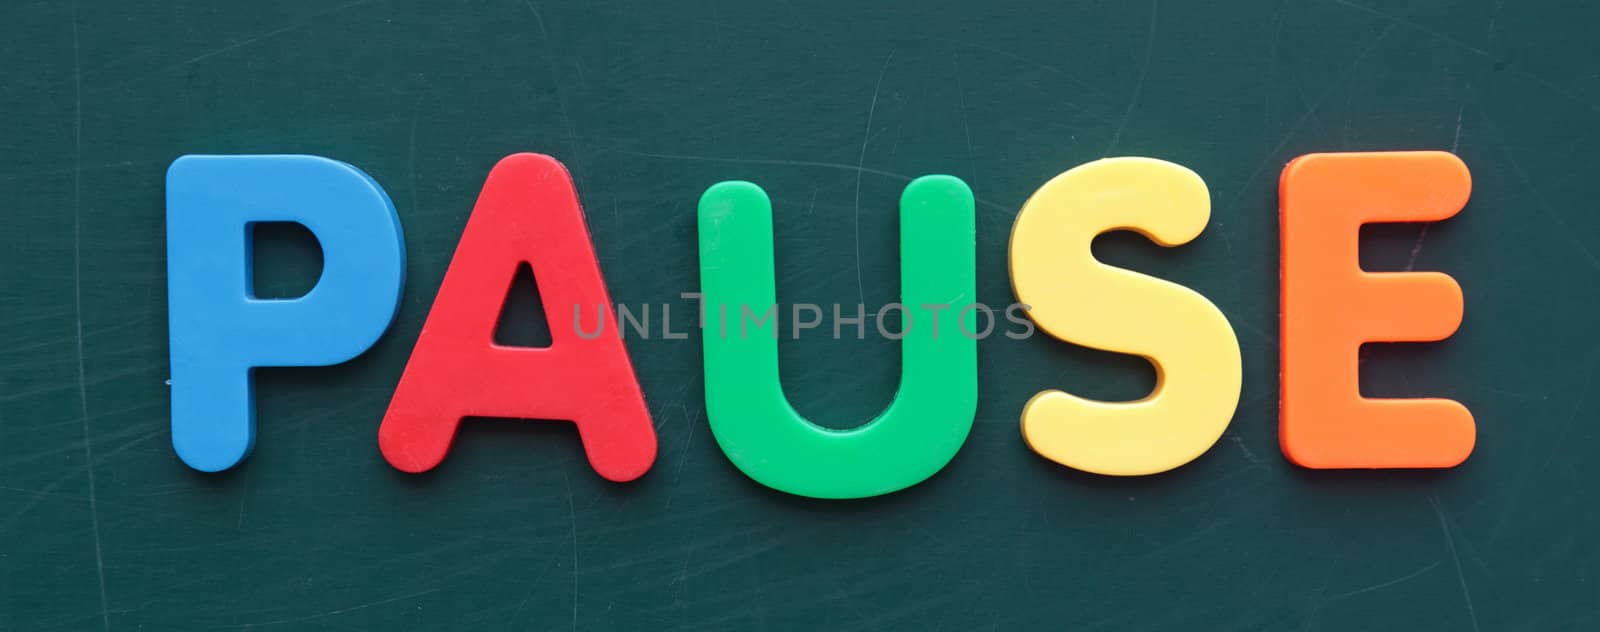 The term pause in colorful letters on a blackboard.